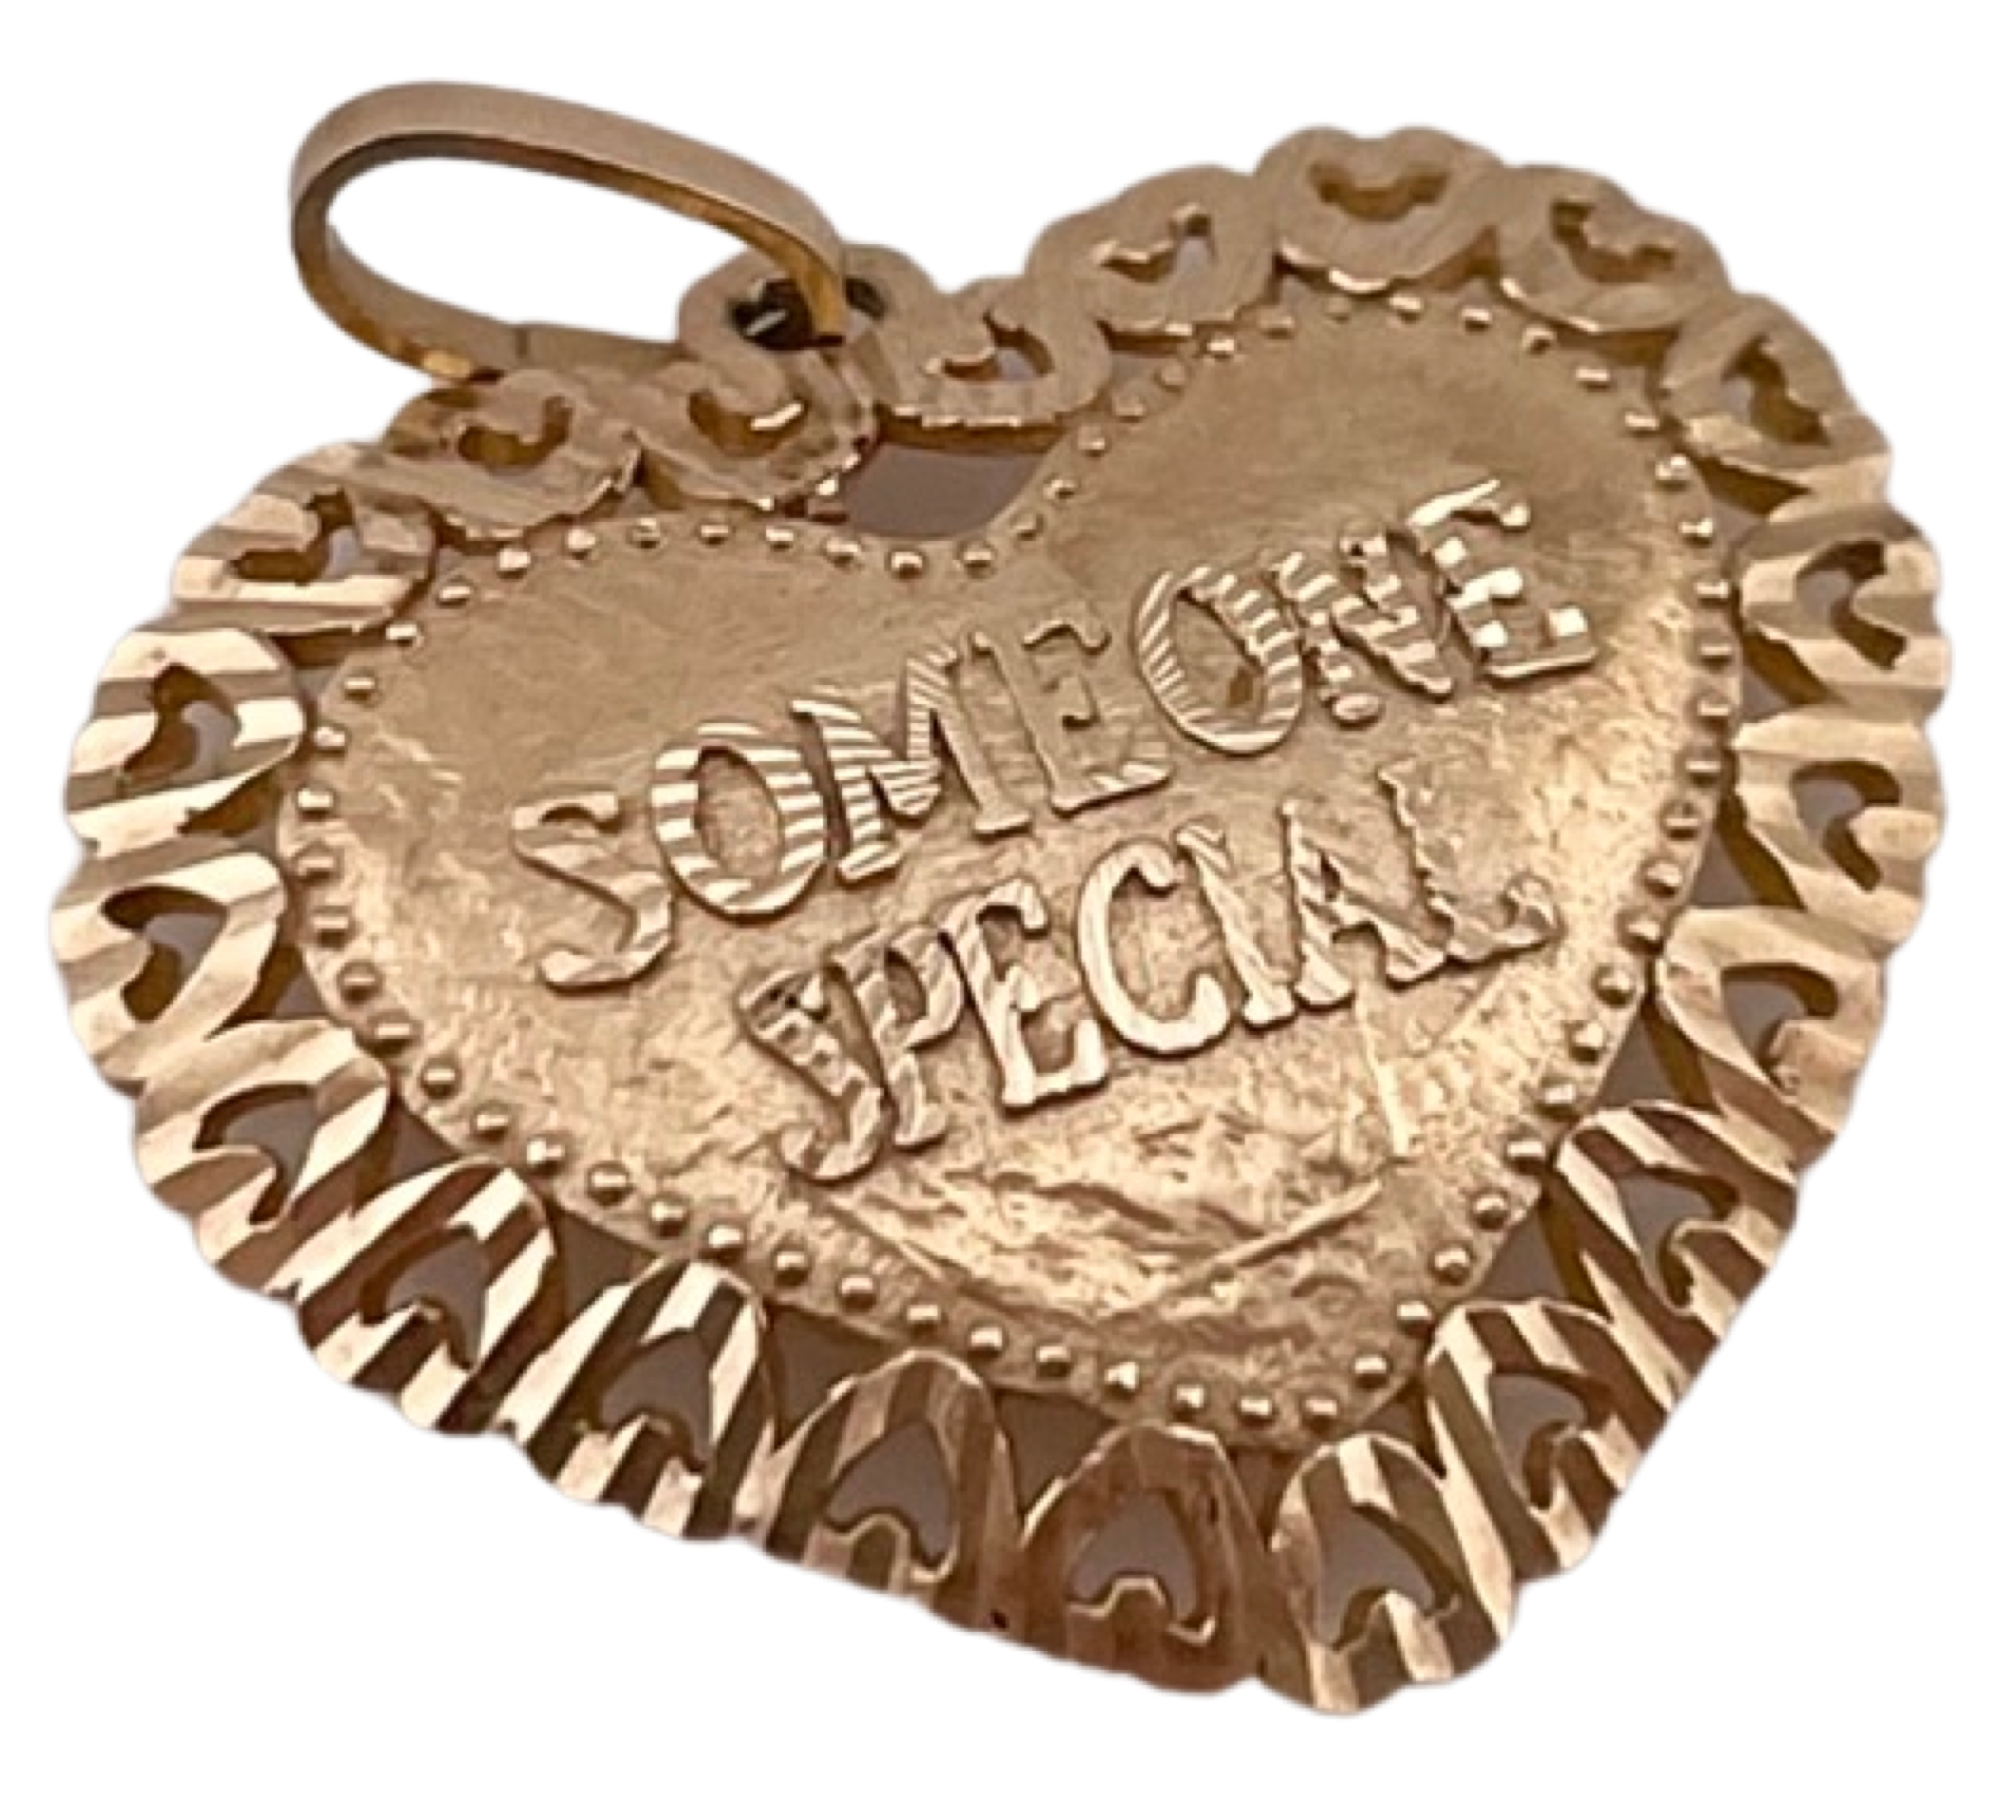 14k gold "Someone Special" heart charm pendant